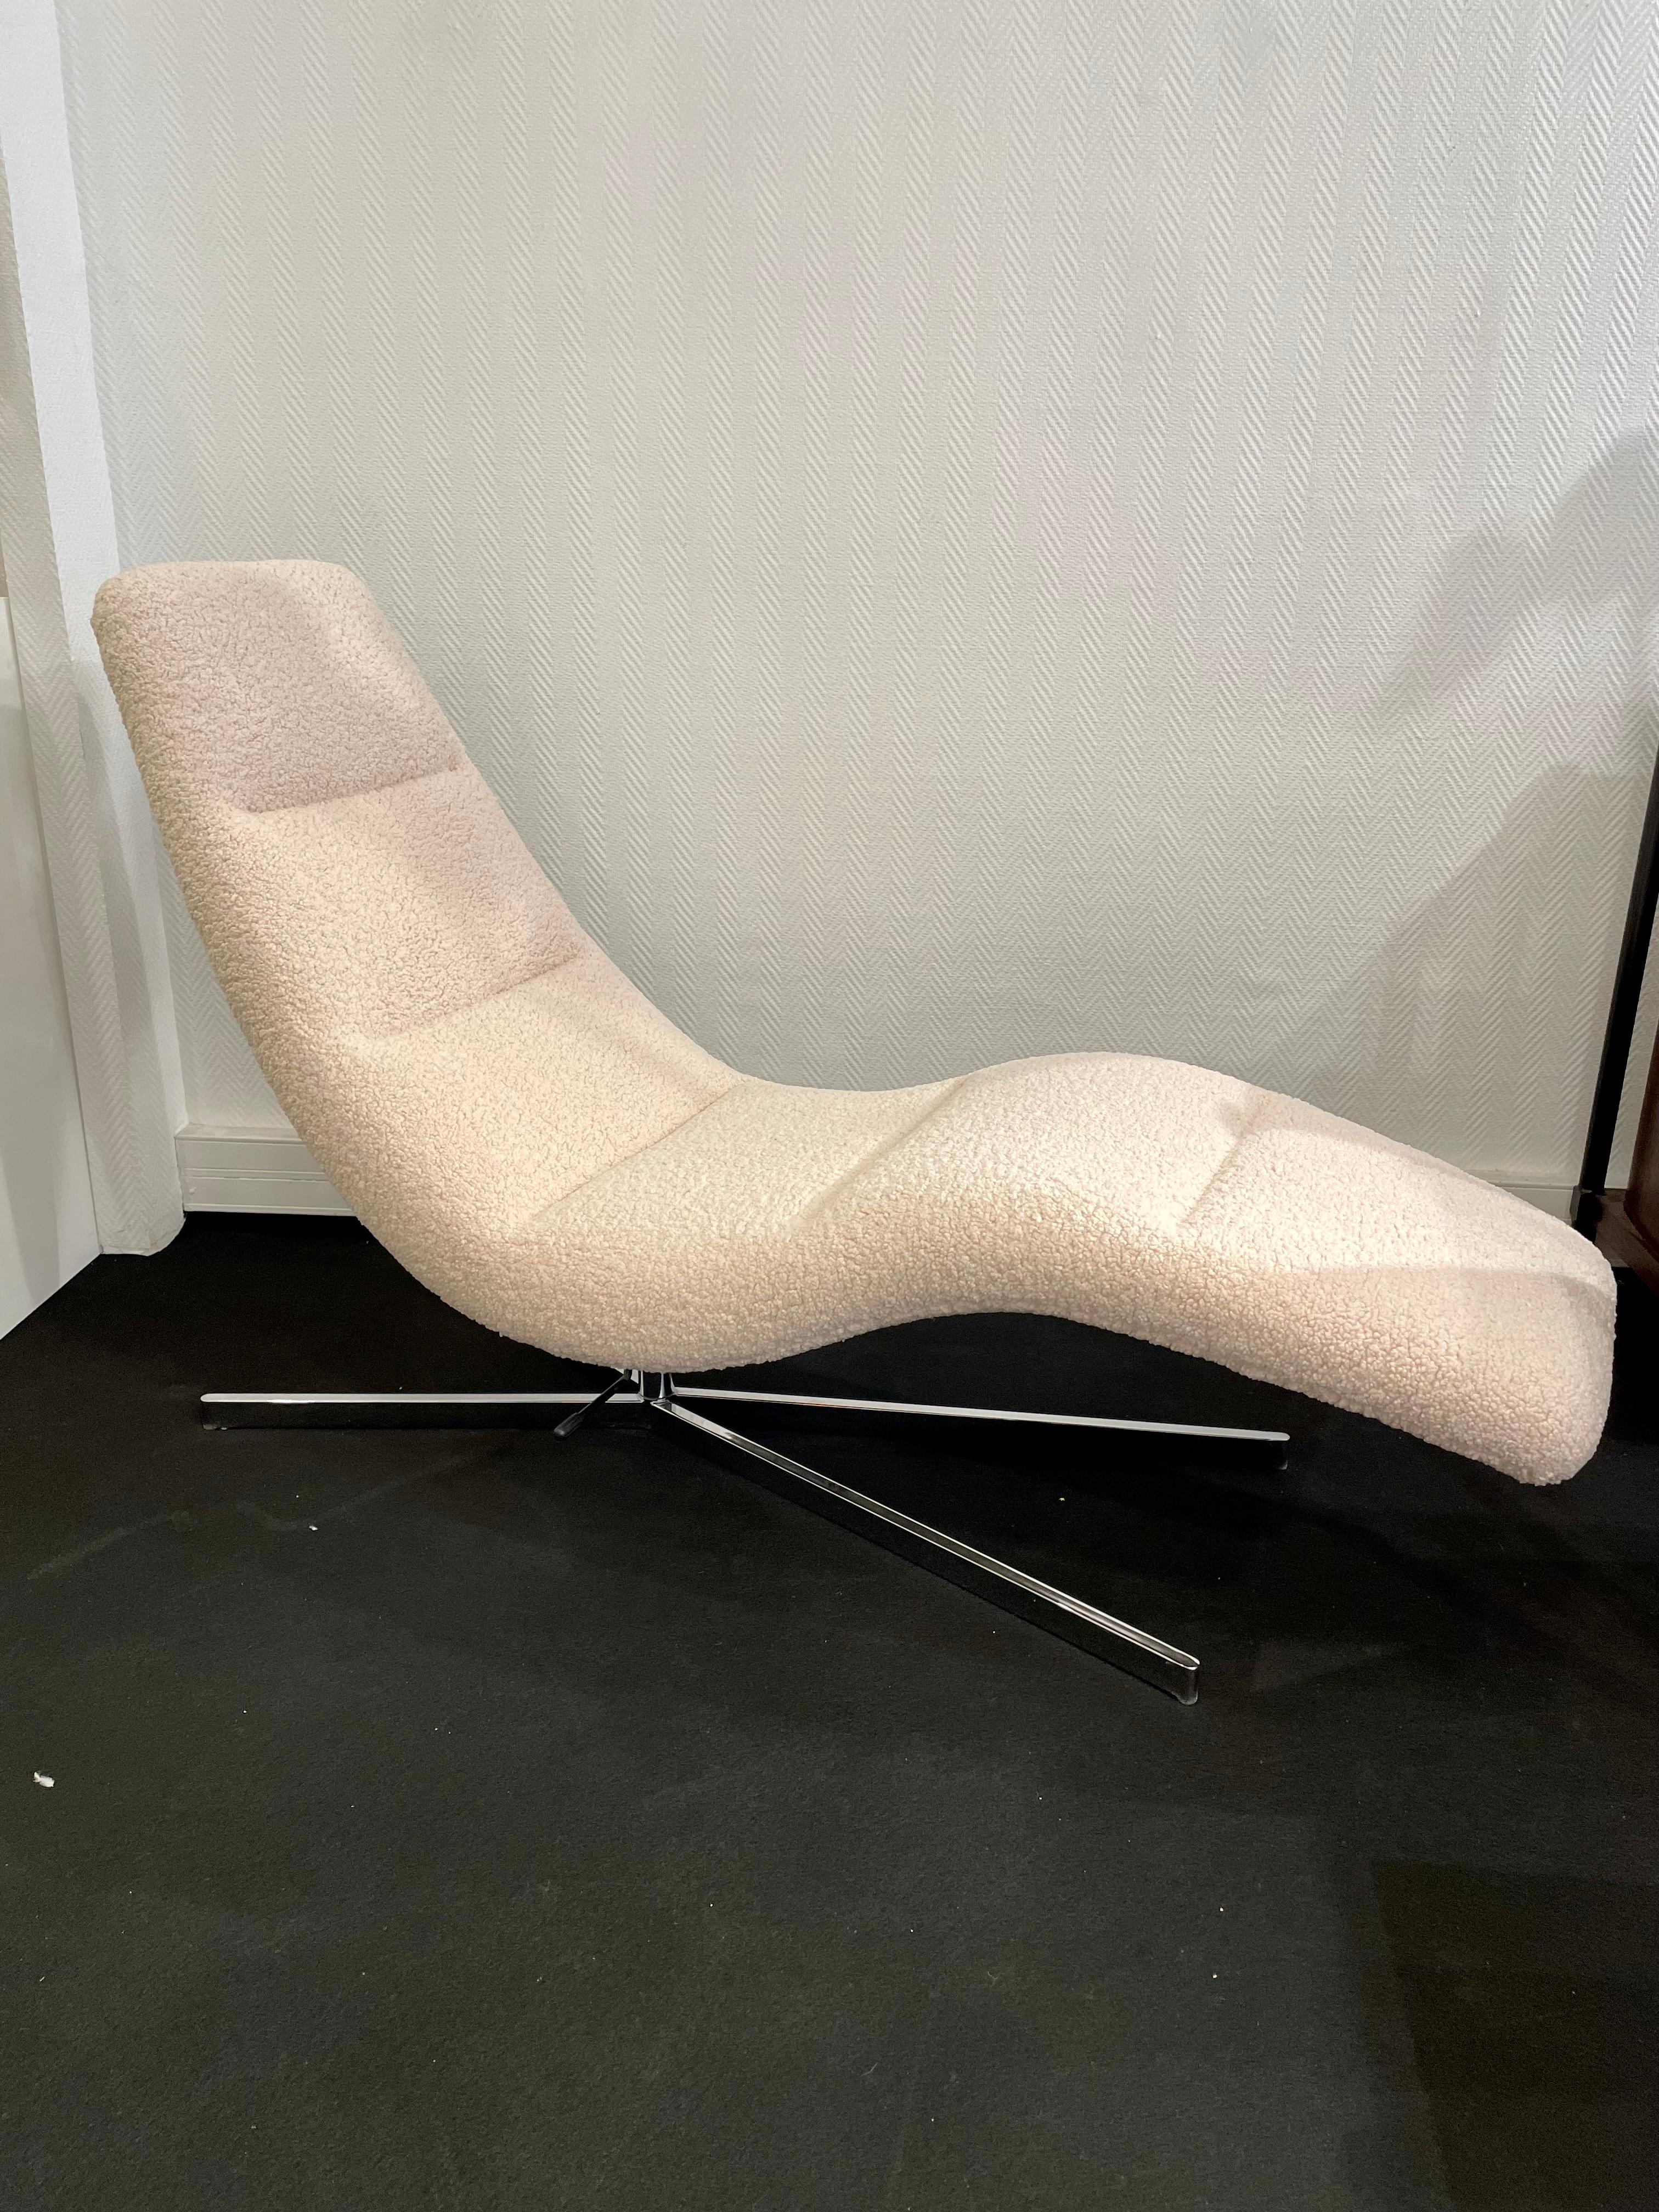 20th Century Lounge Chair 1990 -2000 For Sale